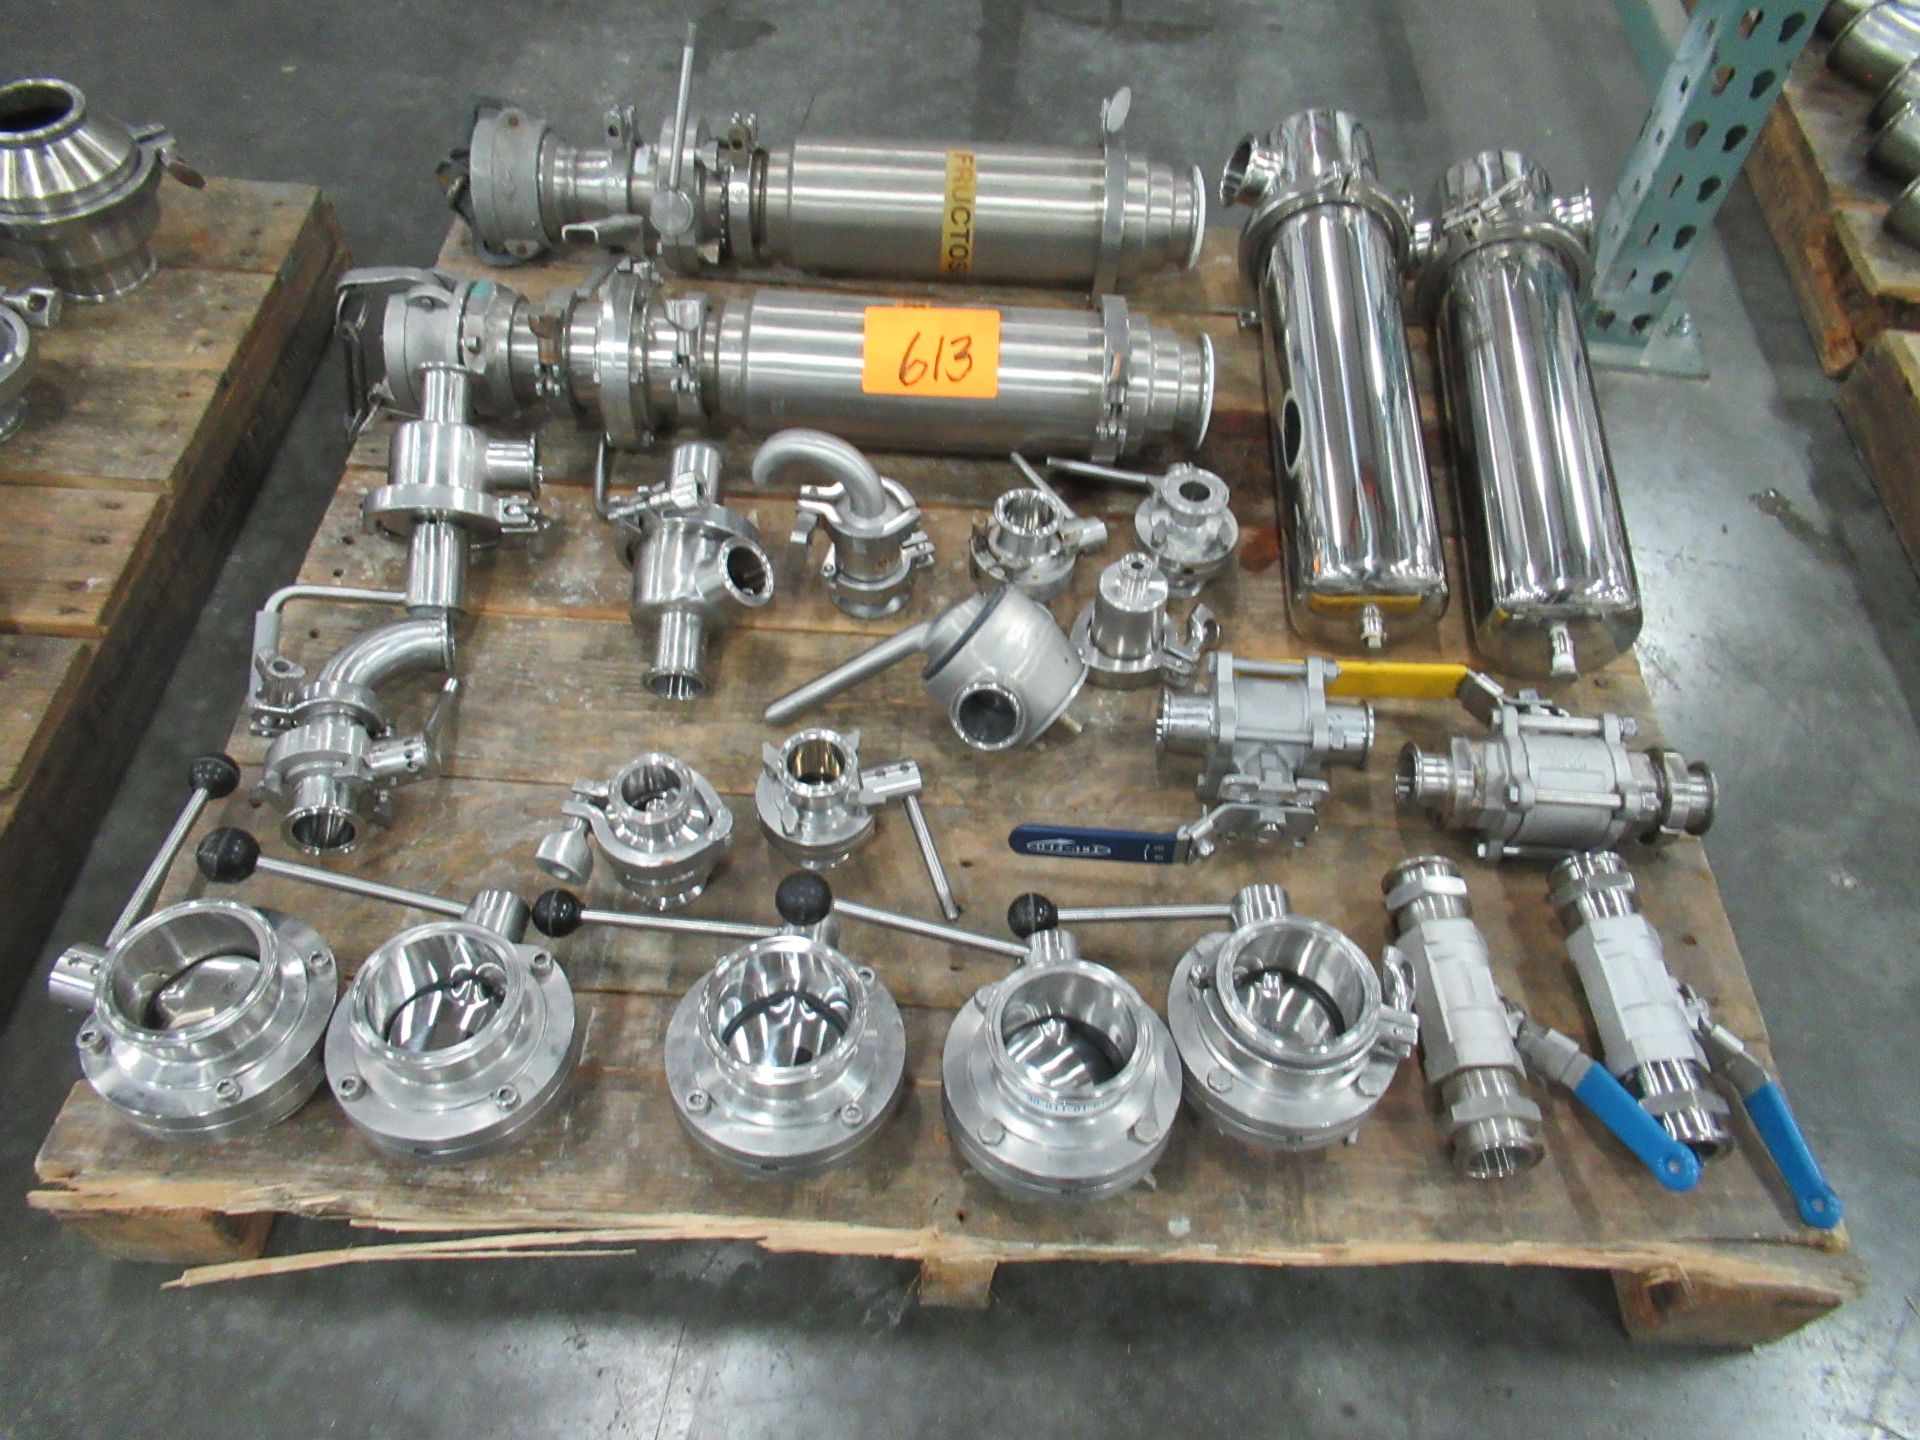 Assorted Valves and Filters